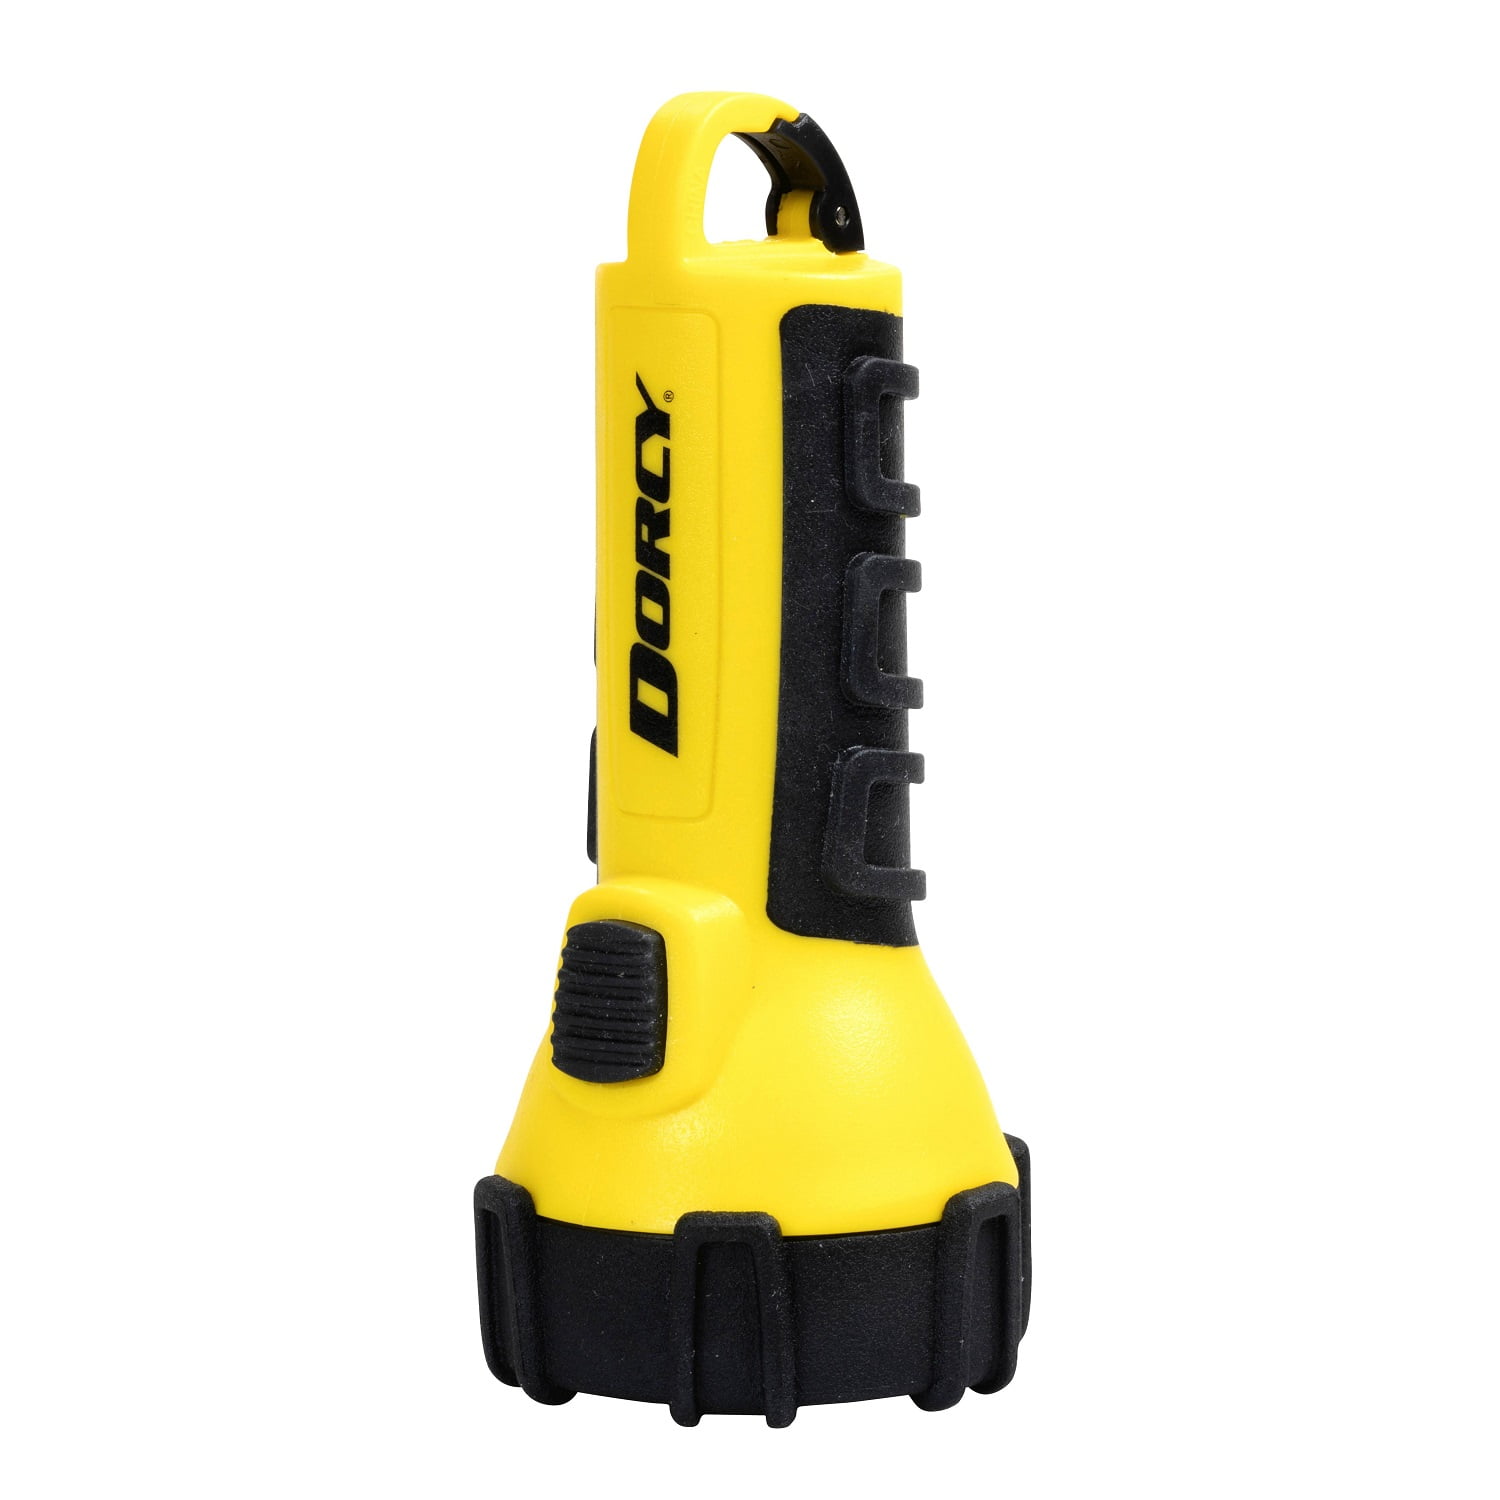 Dorcy 3AAA LED Floating Flashlight with Carabiner Yellow 41-2522